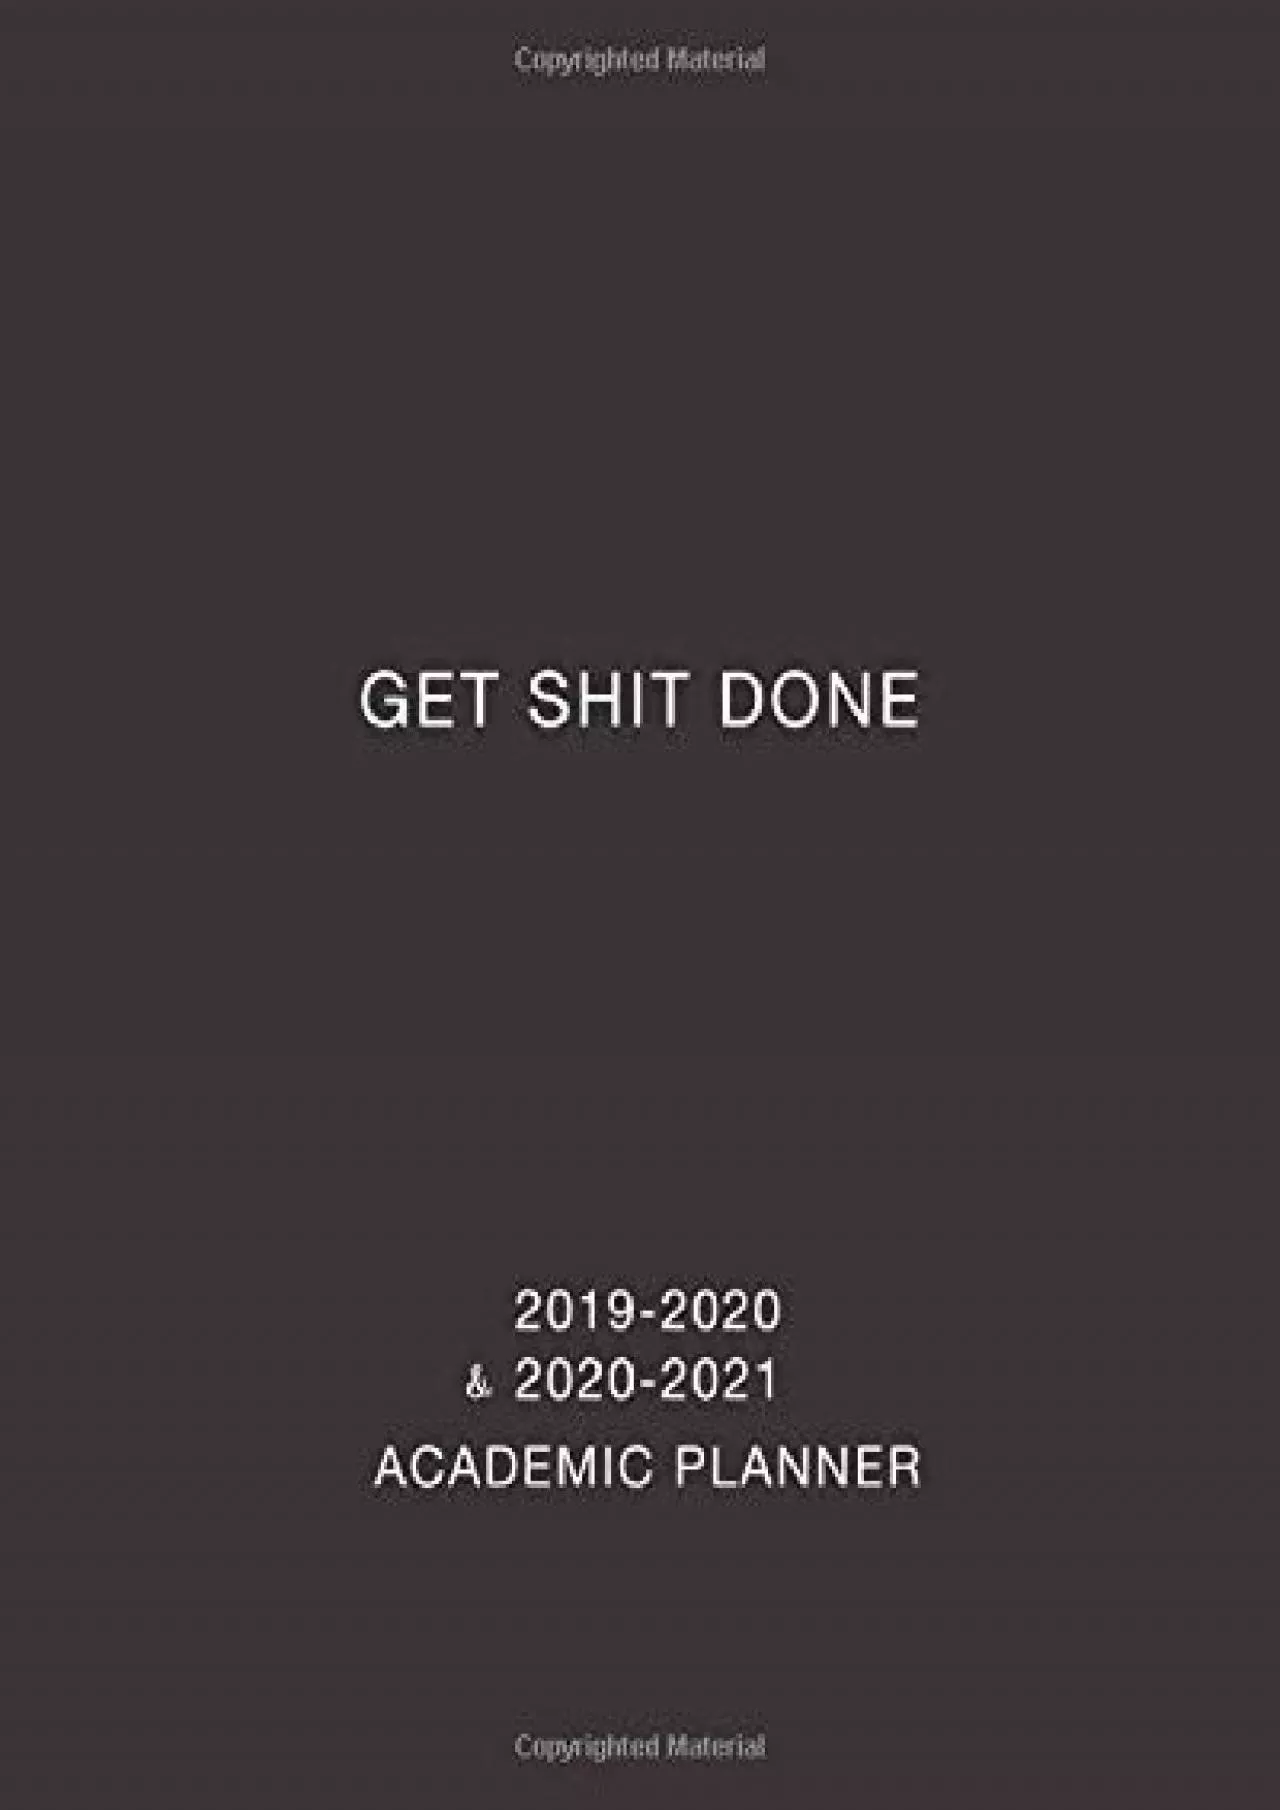 [DOWNLOAD] Get Shit Done Academic Planner 2019-2020 and 2020-2021: Weekly and Monthly